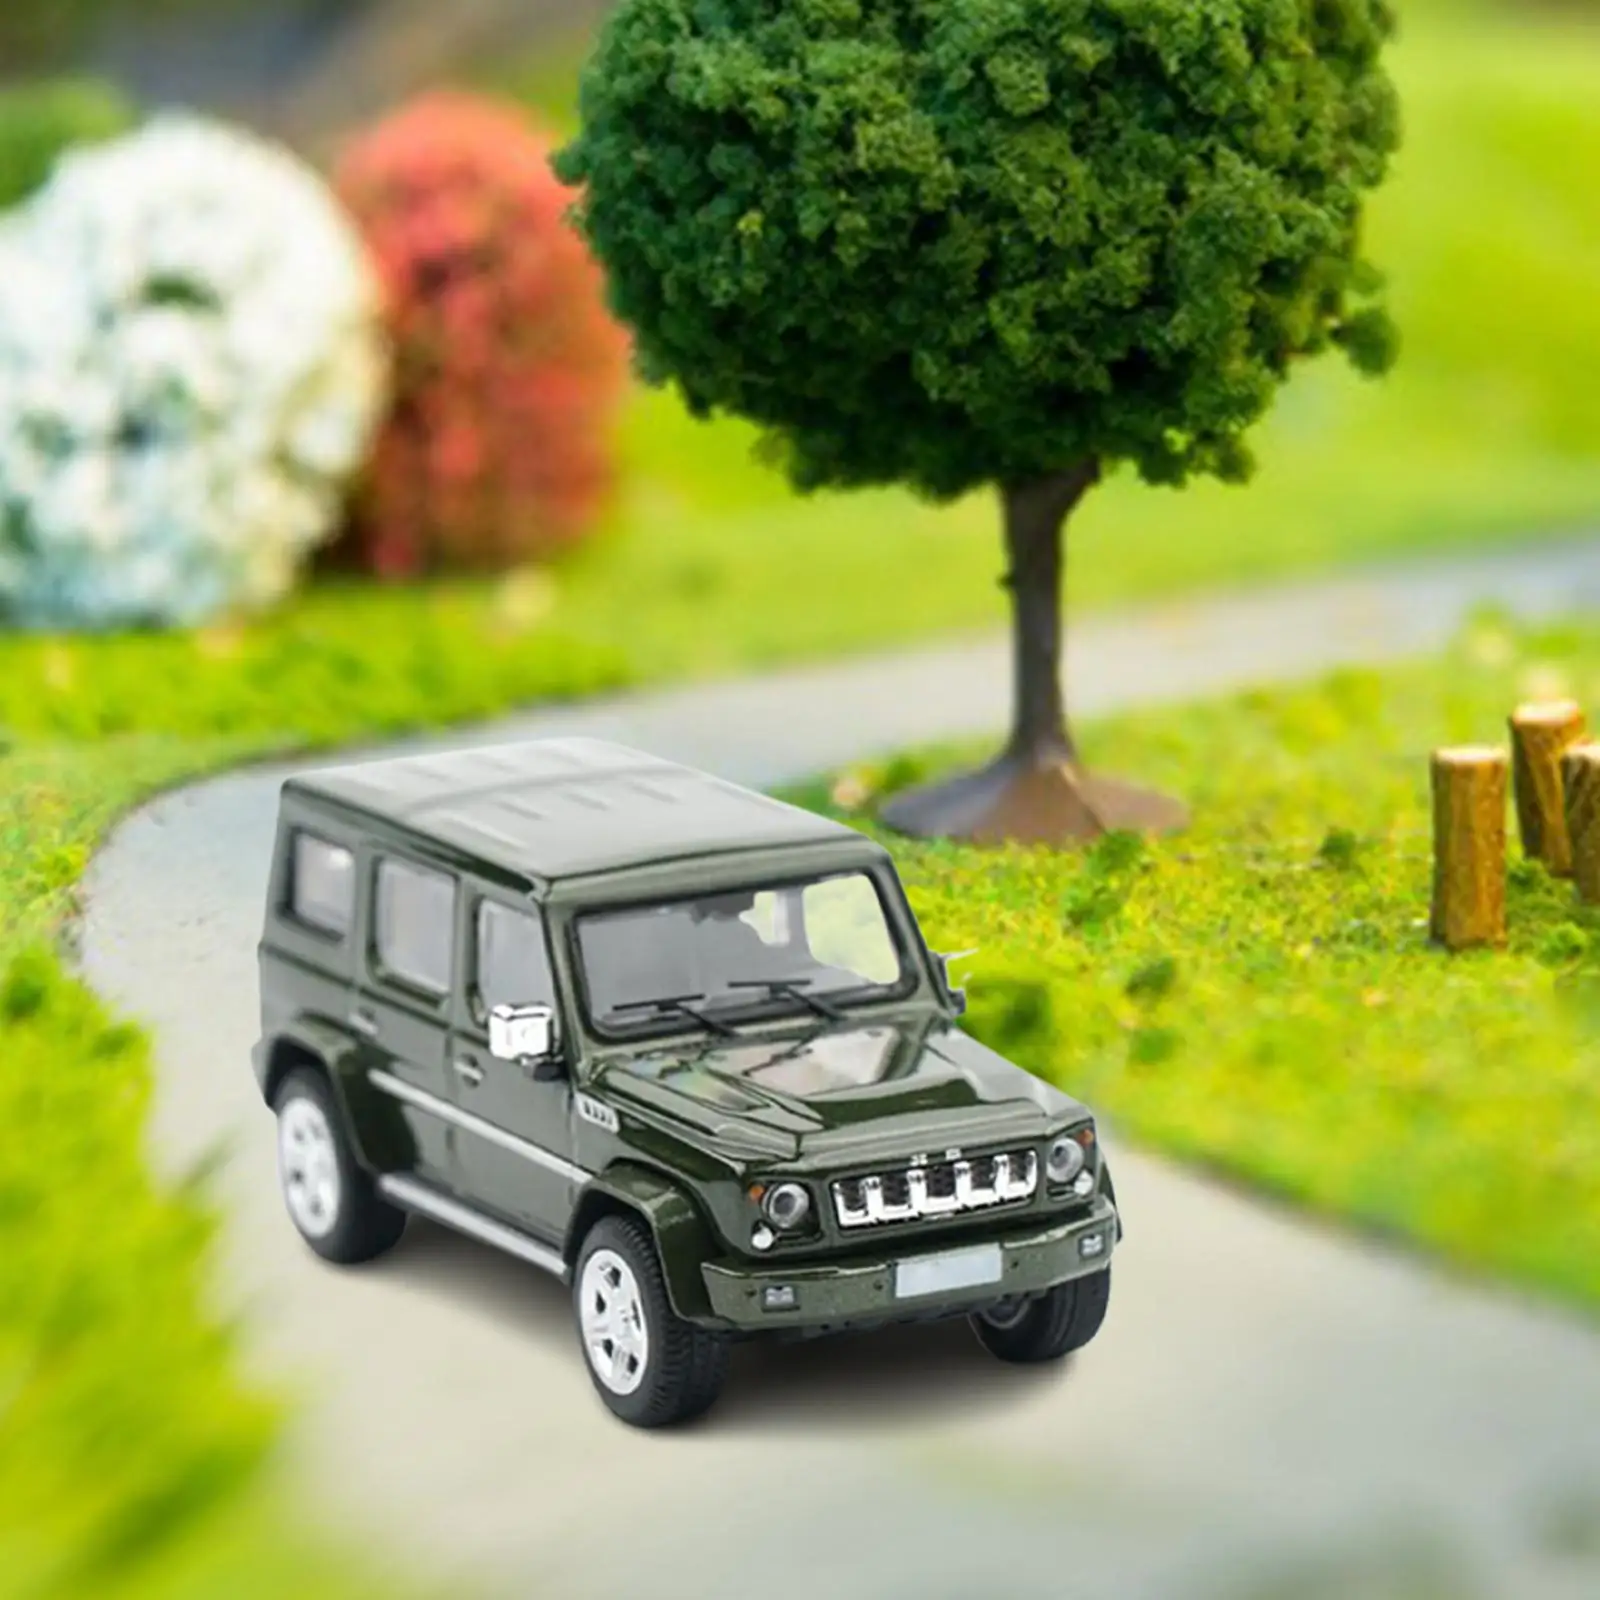 1/64 Miniature Diecast Toys Simulation Mini Vehicles Toys for Diorama Micro Landscapes Photography Props Accessories